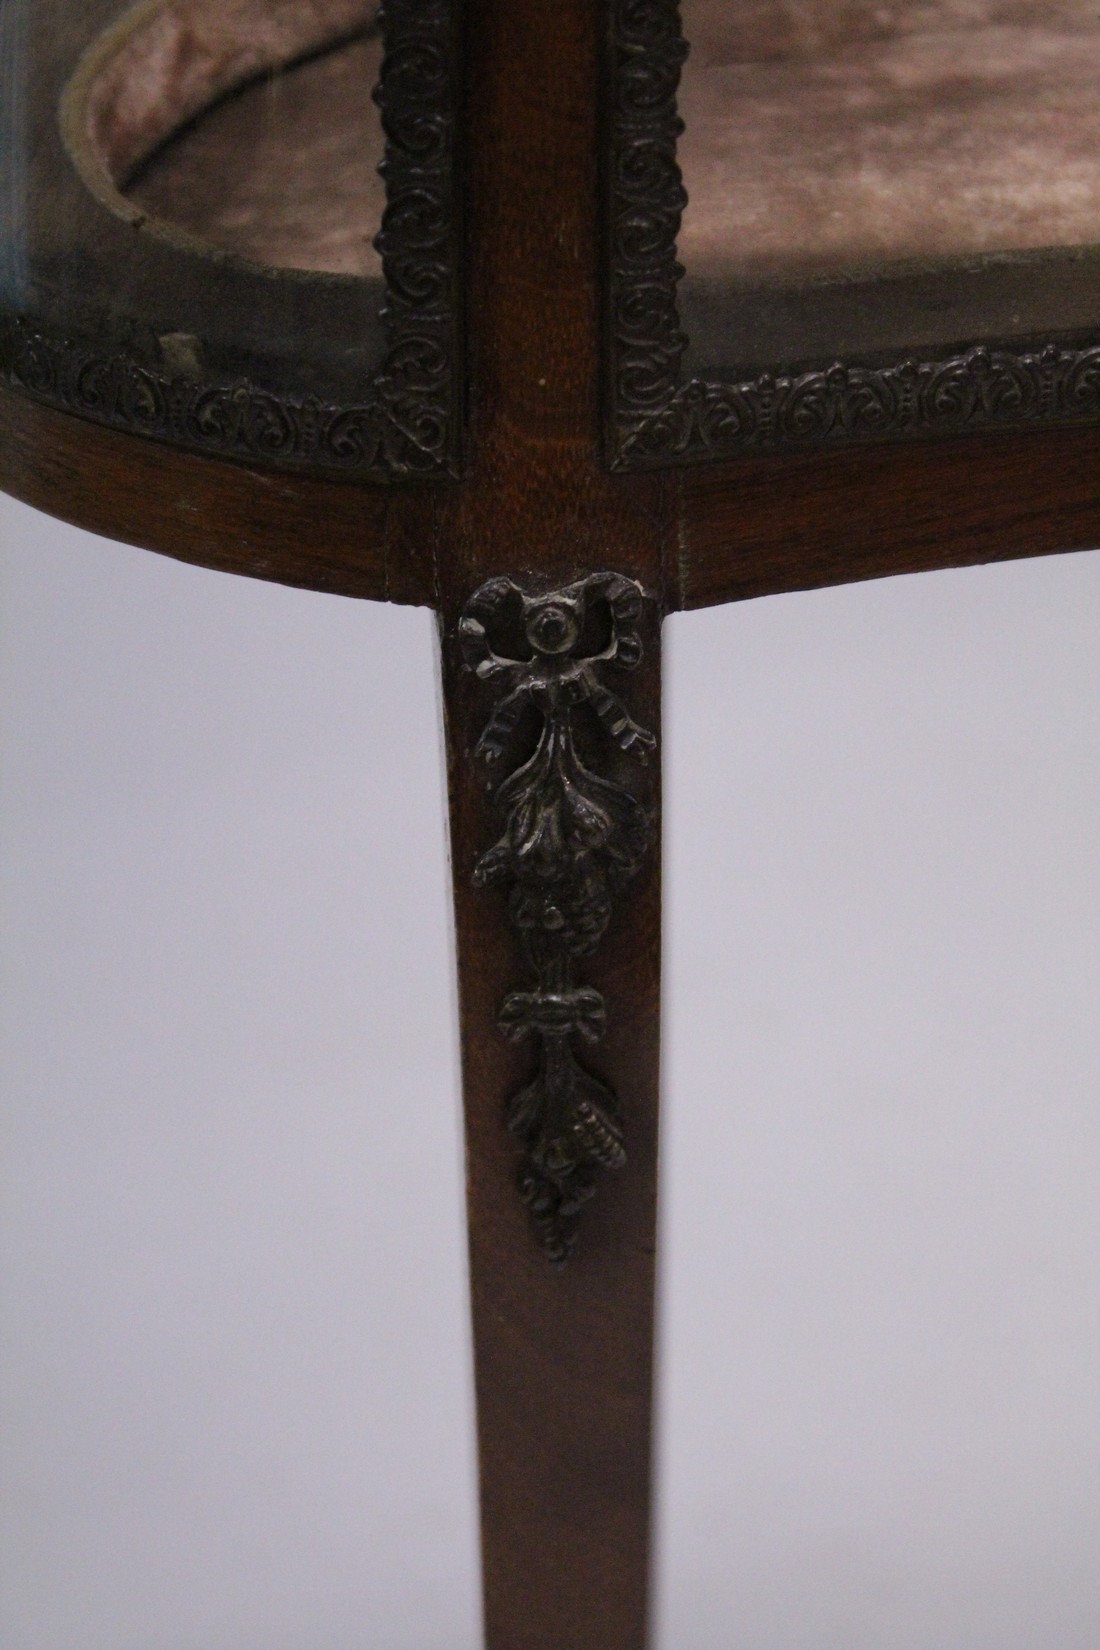 A GOOD 19TH CENTURY FRENCH ROSEWOOD AND MARQUETRY KIDNEY SHAPED BIJOUTERIE TABLE inlaid with - Image 3 of 6